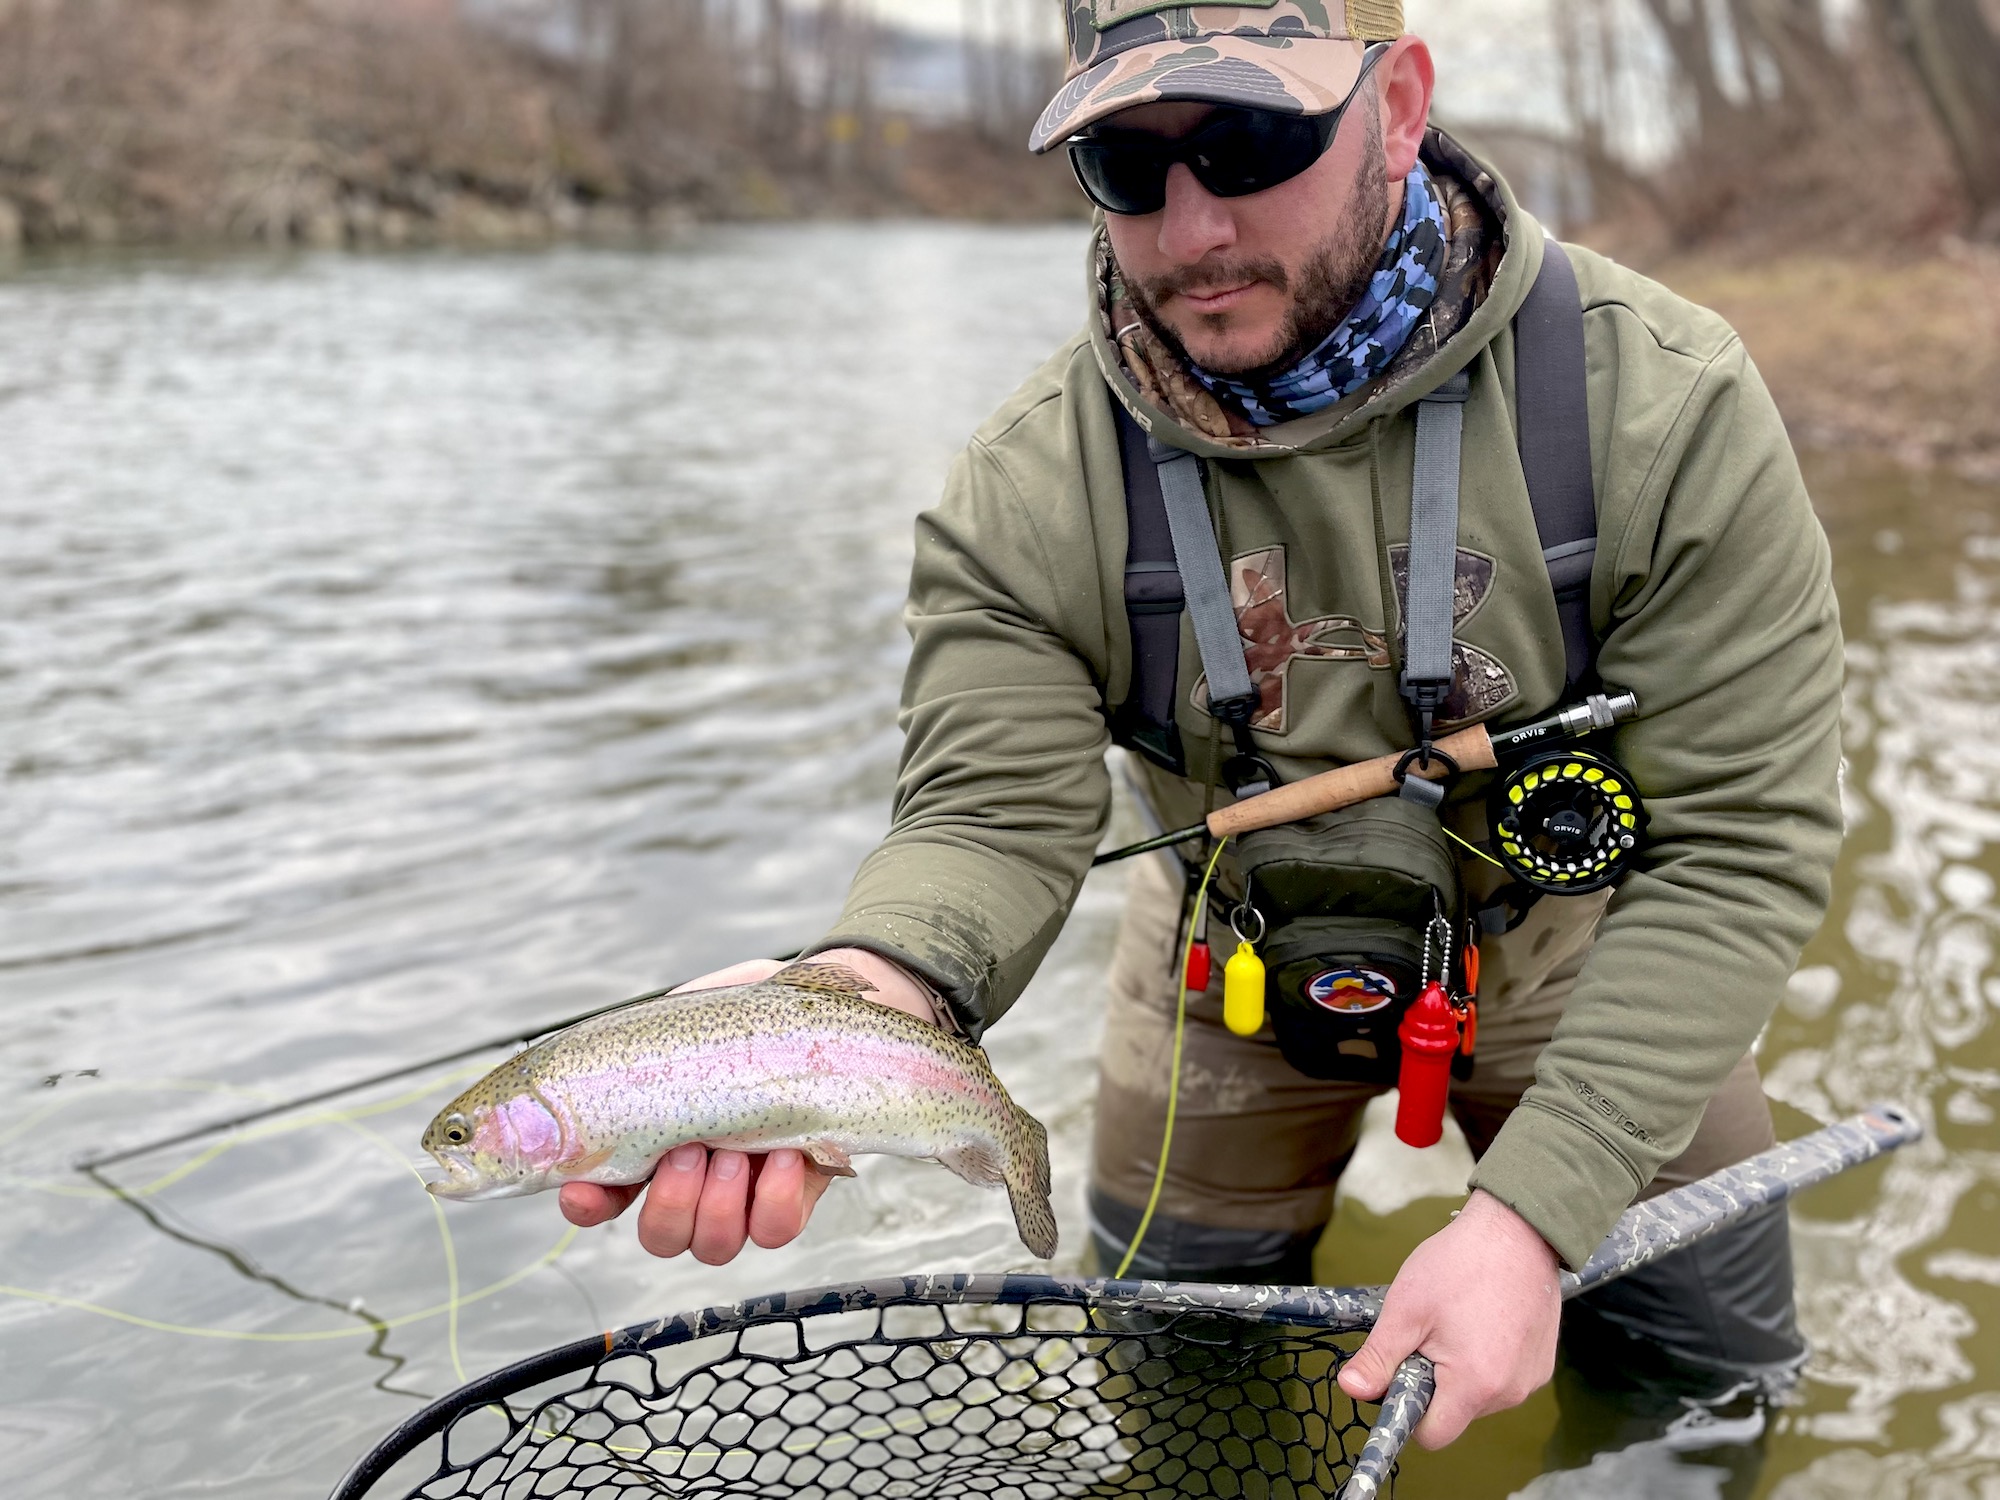 Simms Fishing Gear Review: Is the high-end brand worth the price - Reviewed